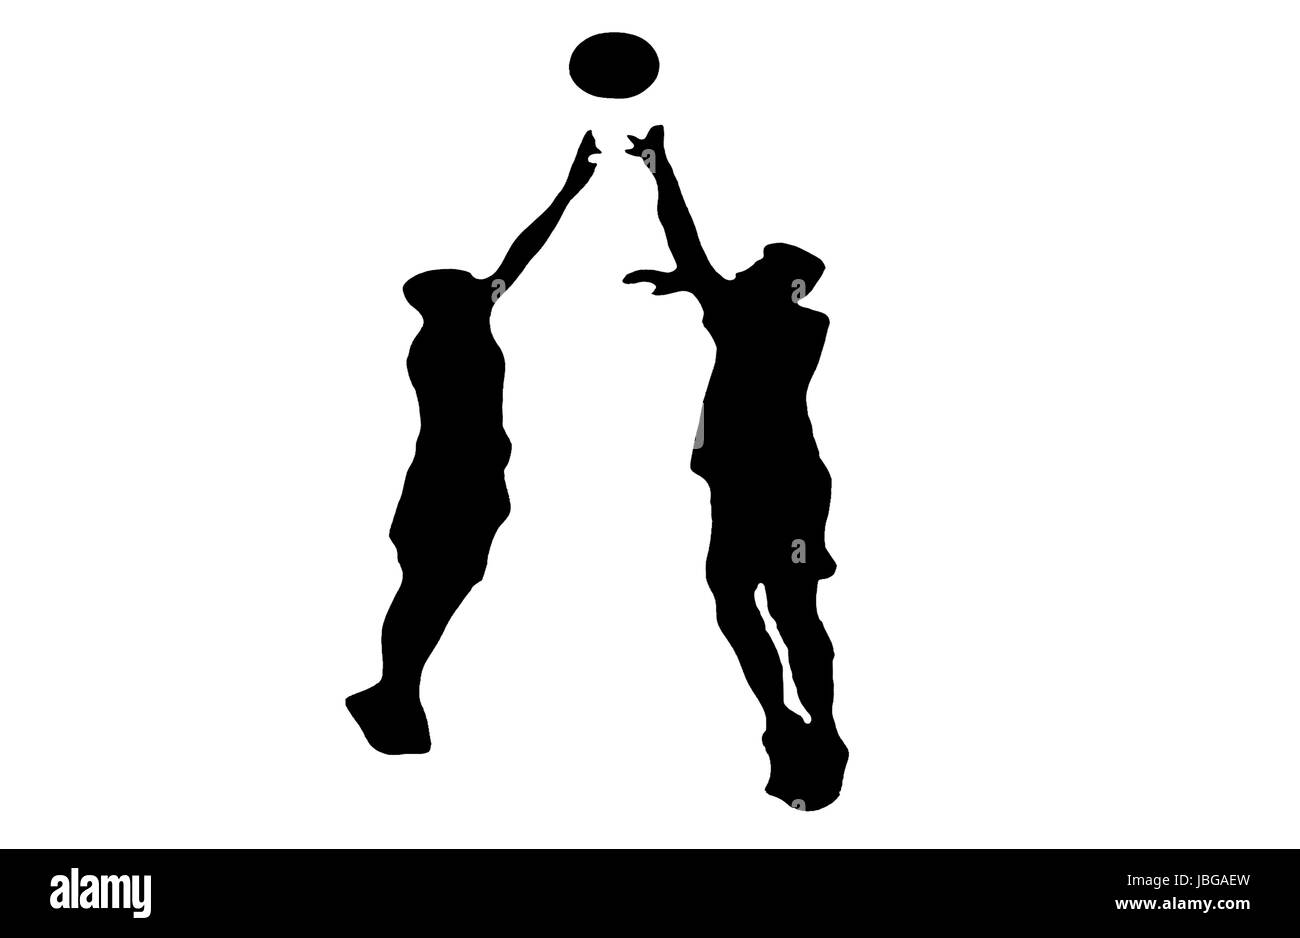 Silhouette of man playing basketball sur fond blanc Banque D'Images